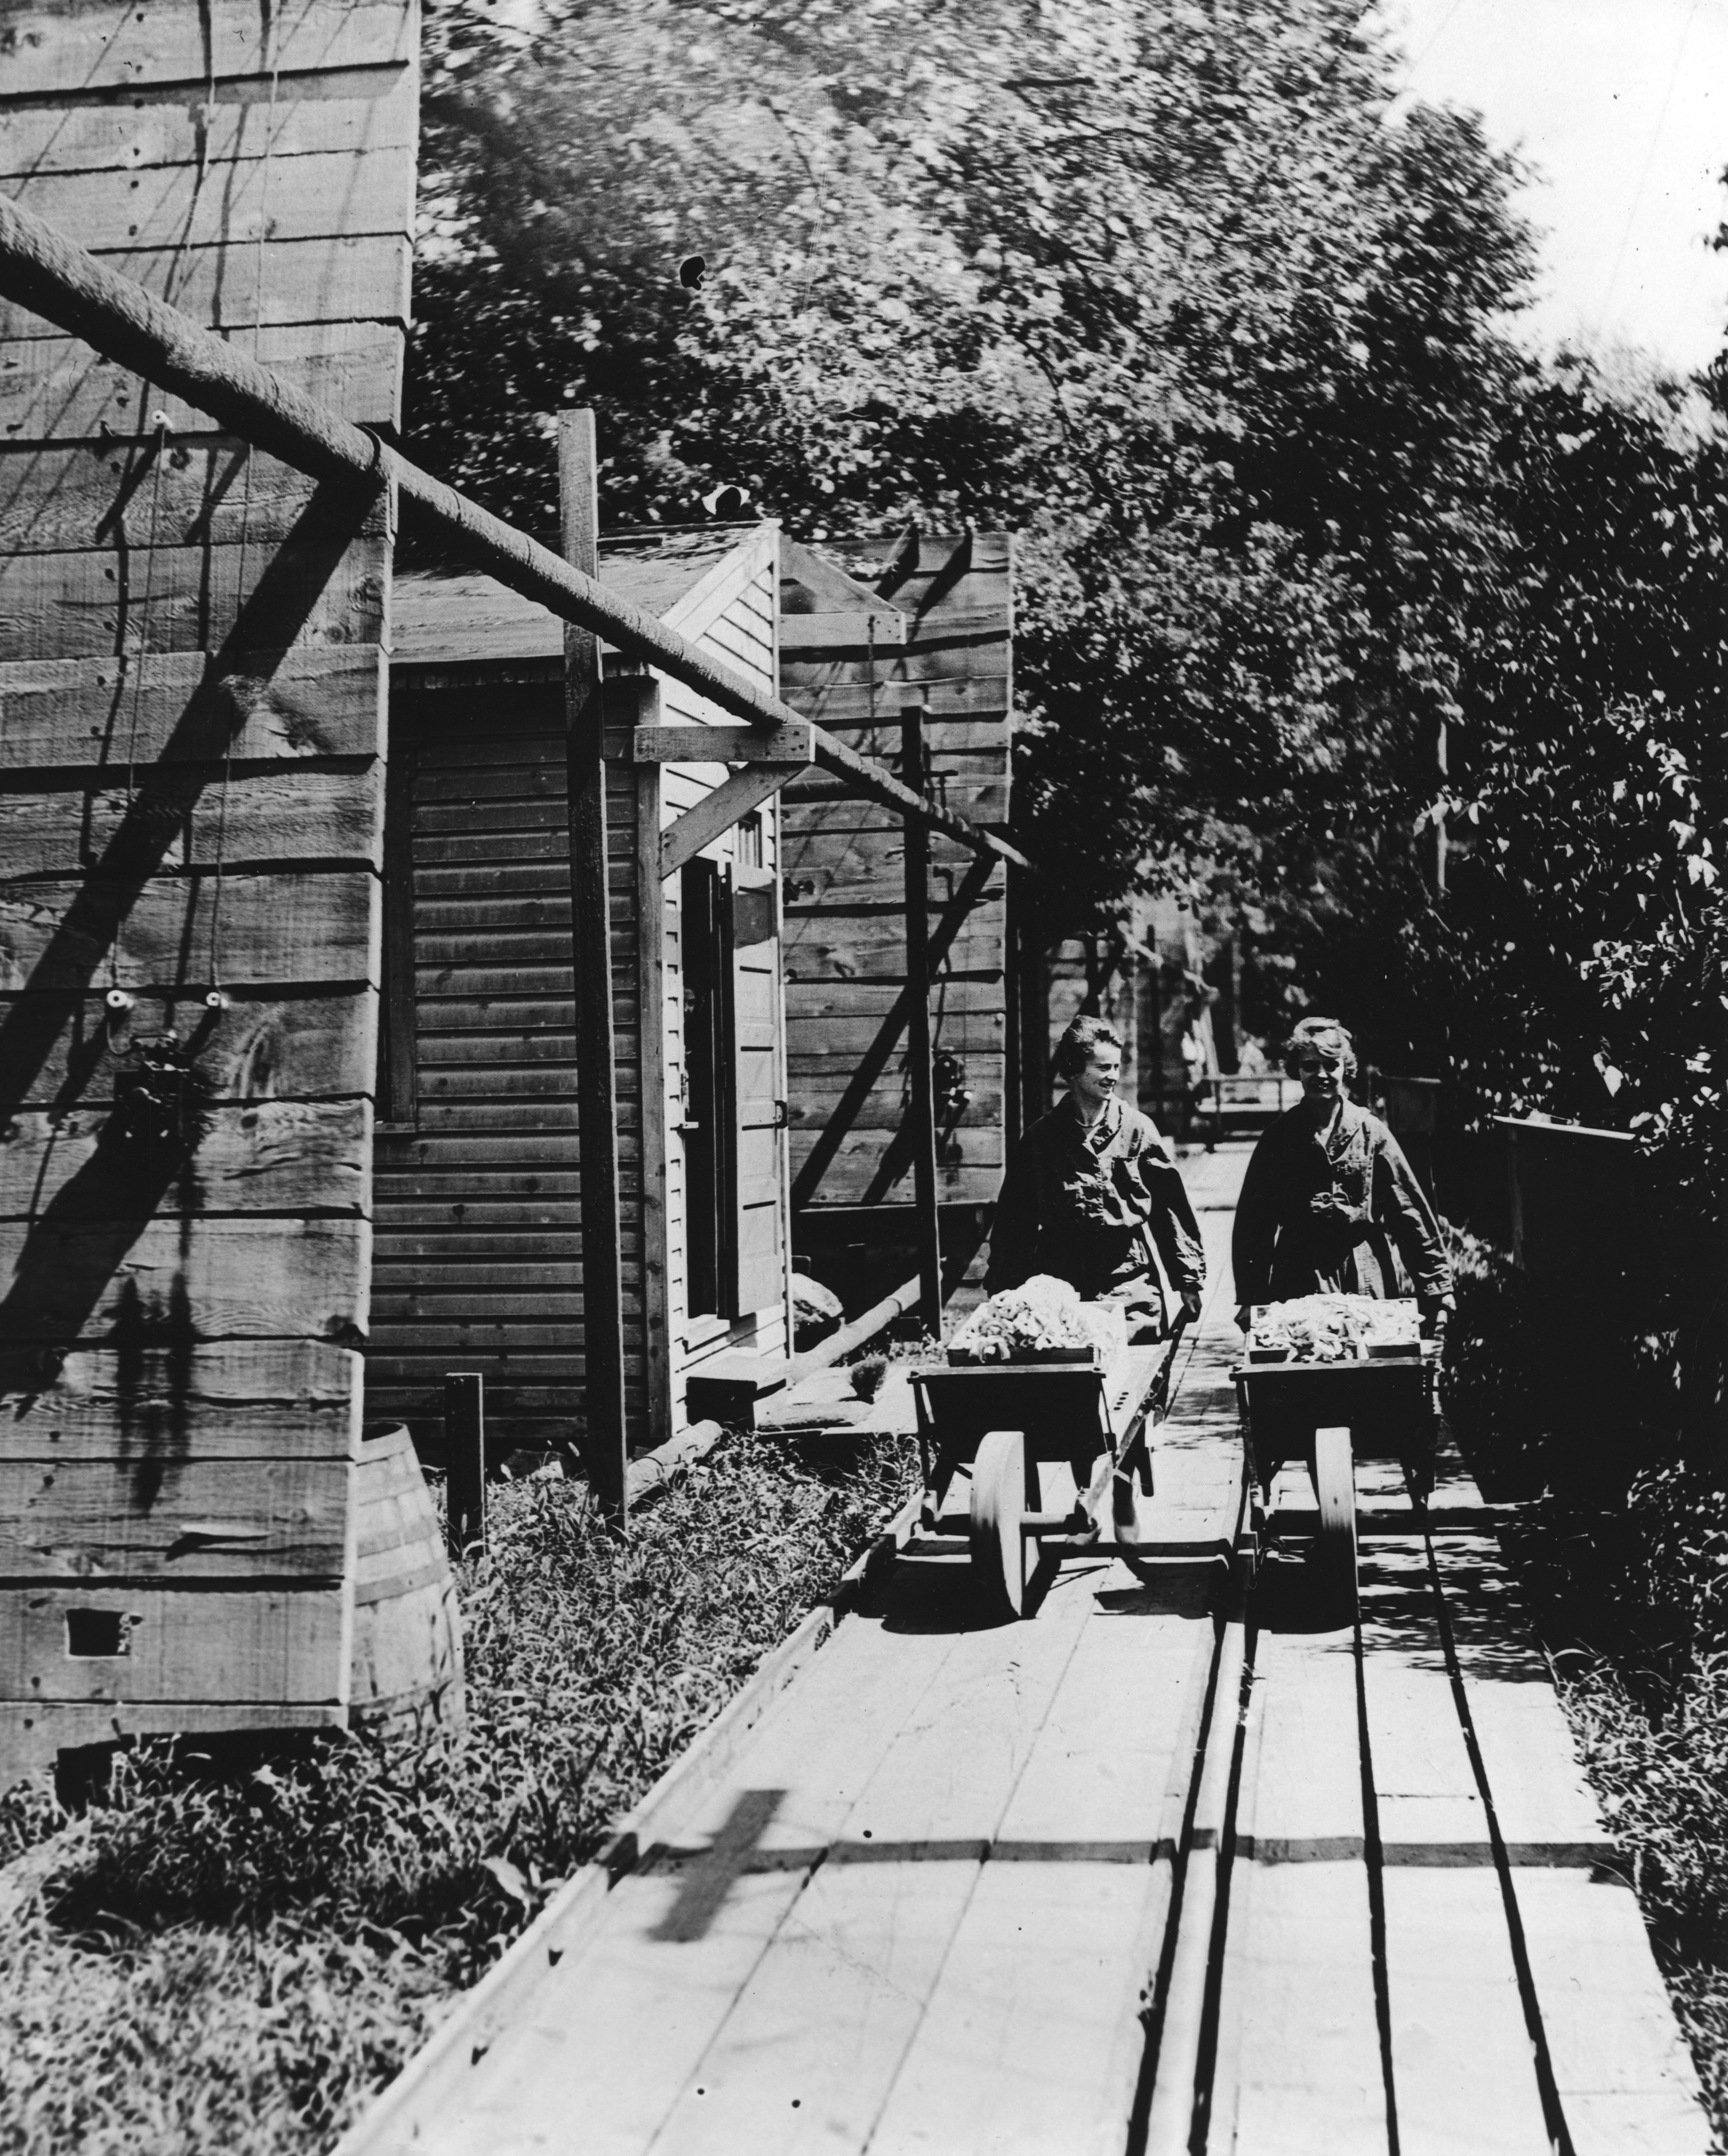 Black and white photograph of two women transporting material in wheelbarrows along a wooden walkway next to buildings.